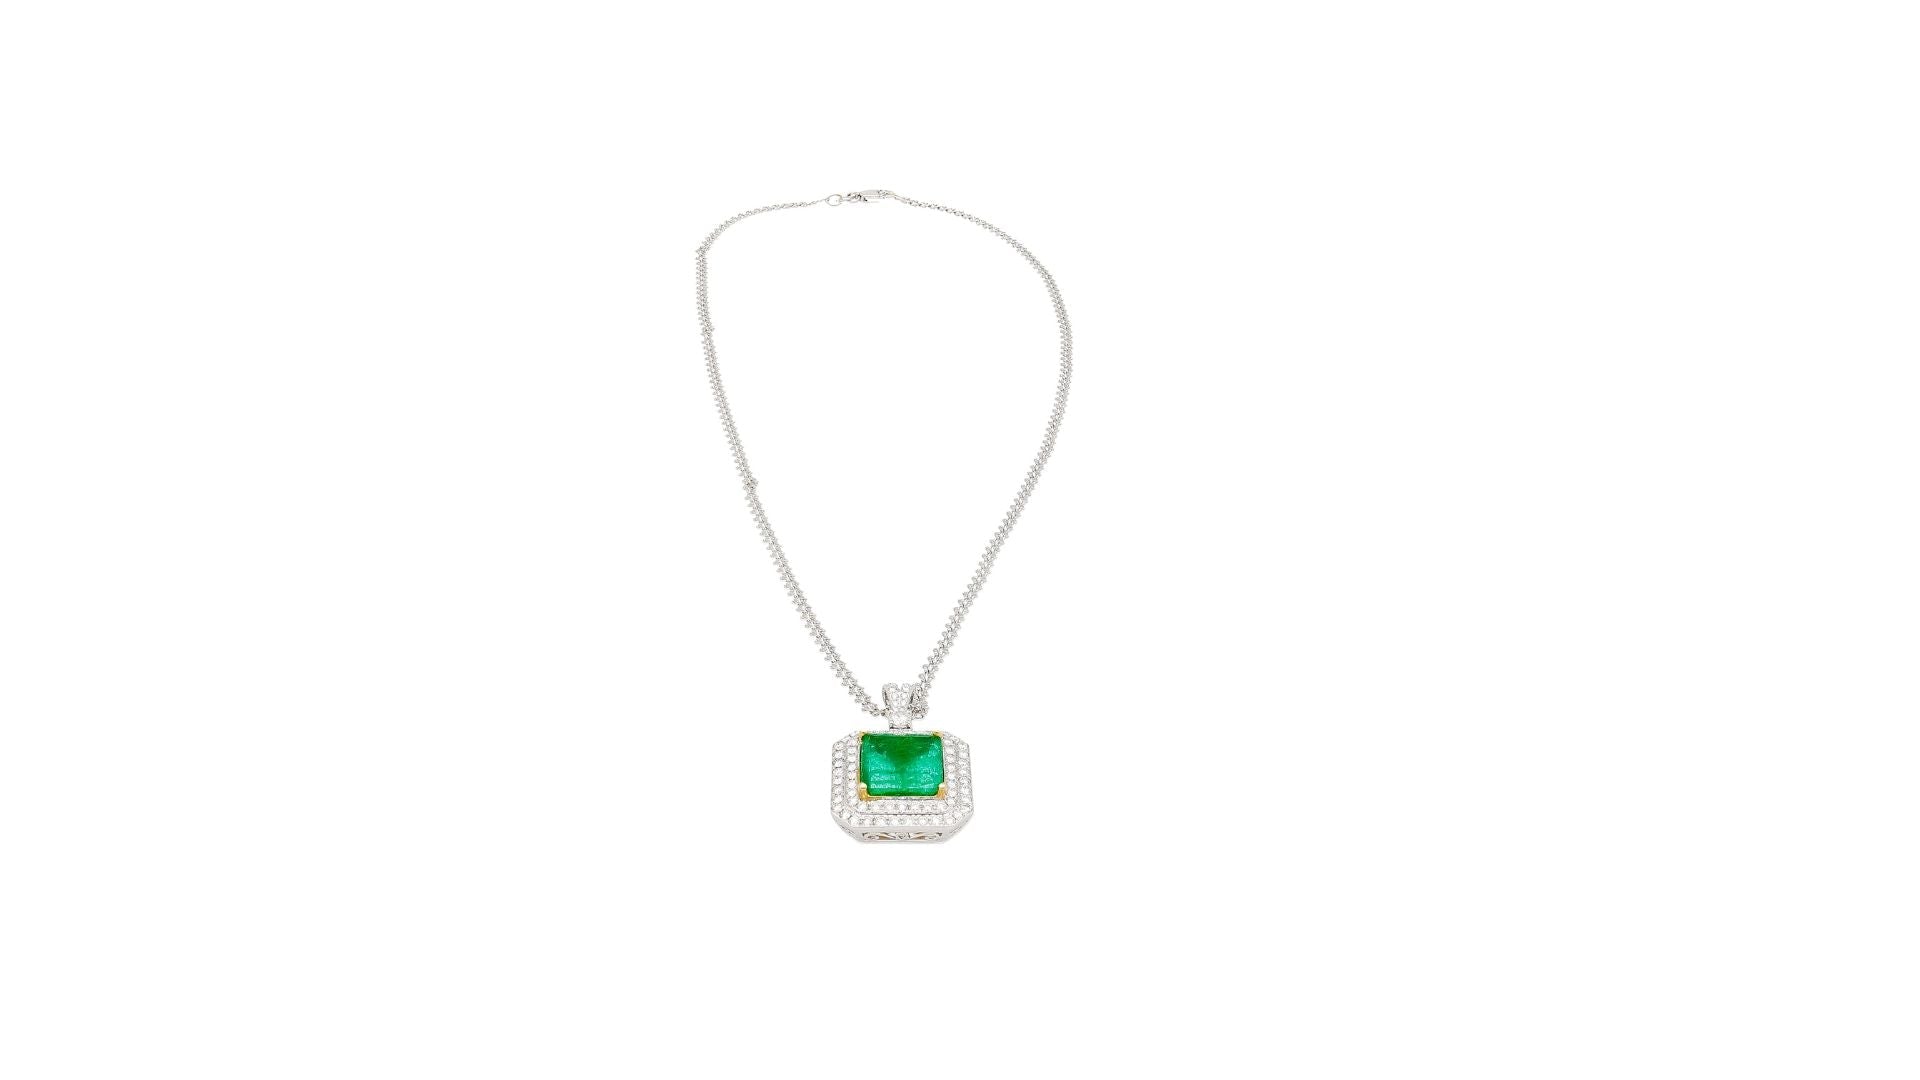 GIA Certified 6.33 Carat Minor Oil Colombian Emerald Necklace in 18K White Gold-Necklace-ASSAY